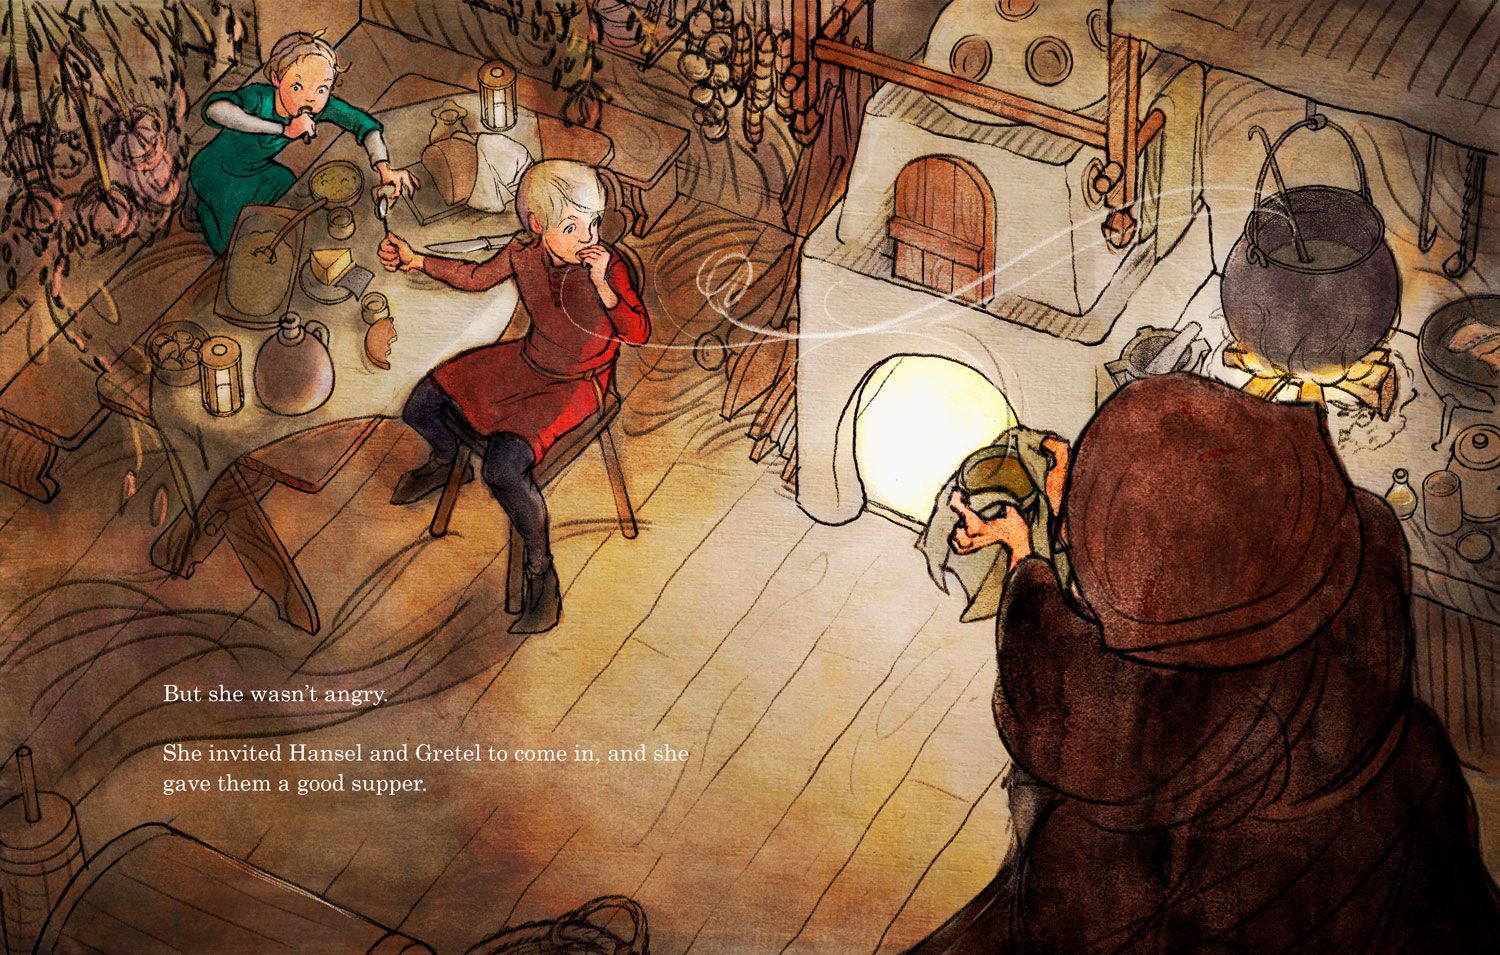 CBPro-Hansel-and-Gretel-in-the-Witch's-House-4-bigger-witch.jpg